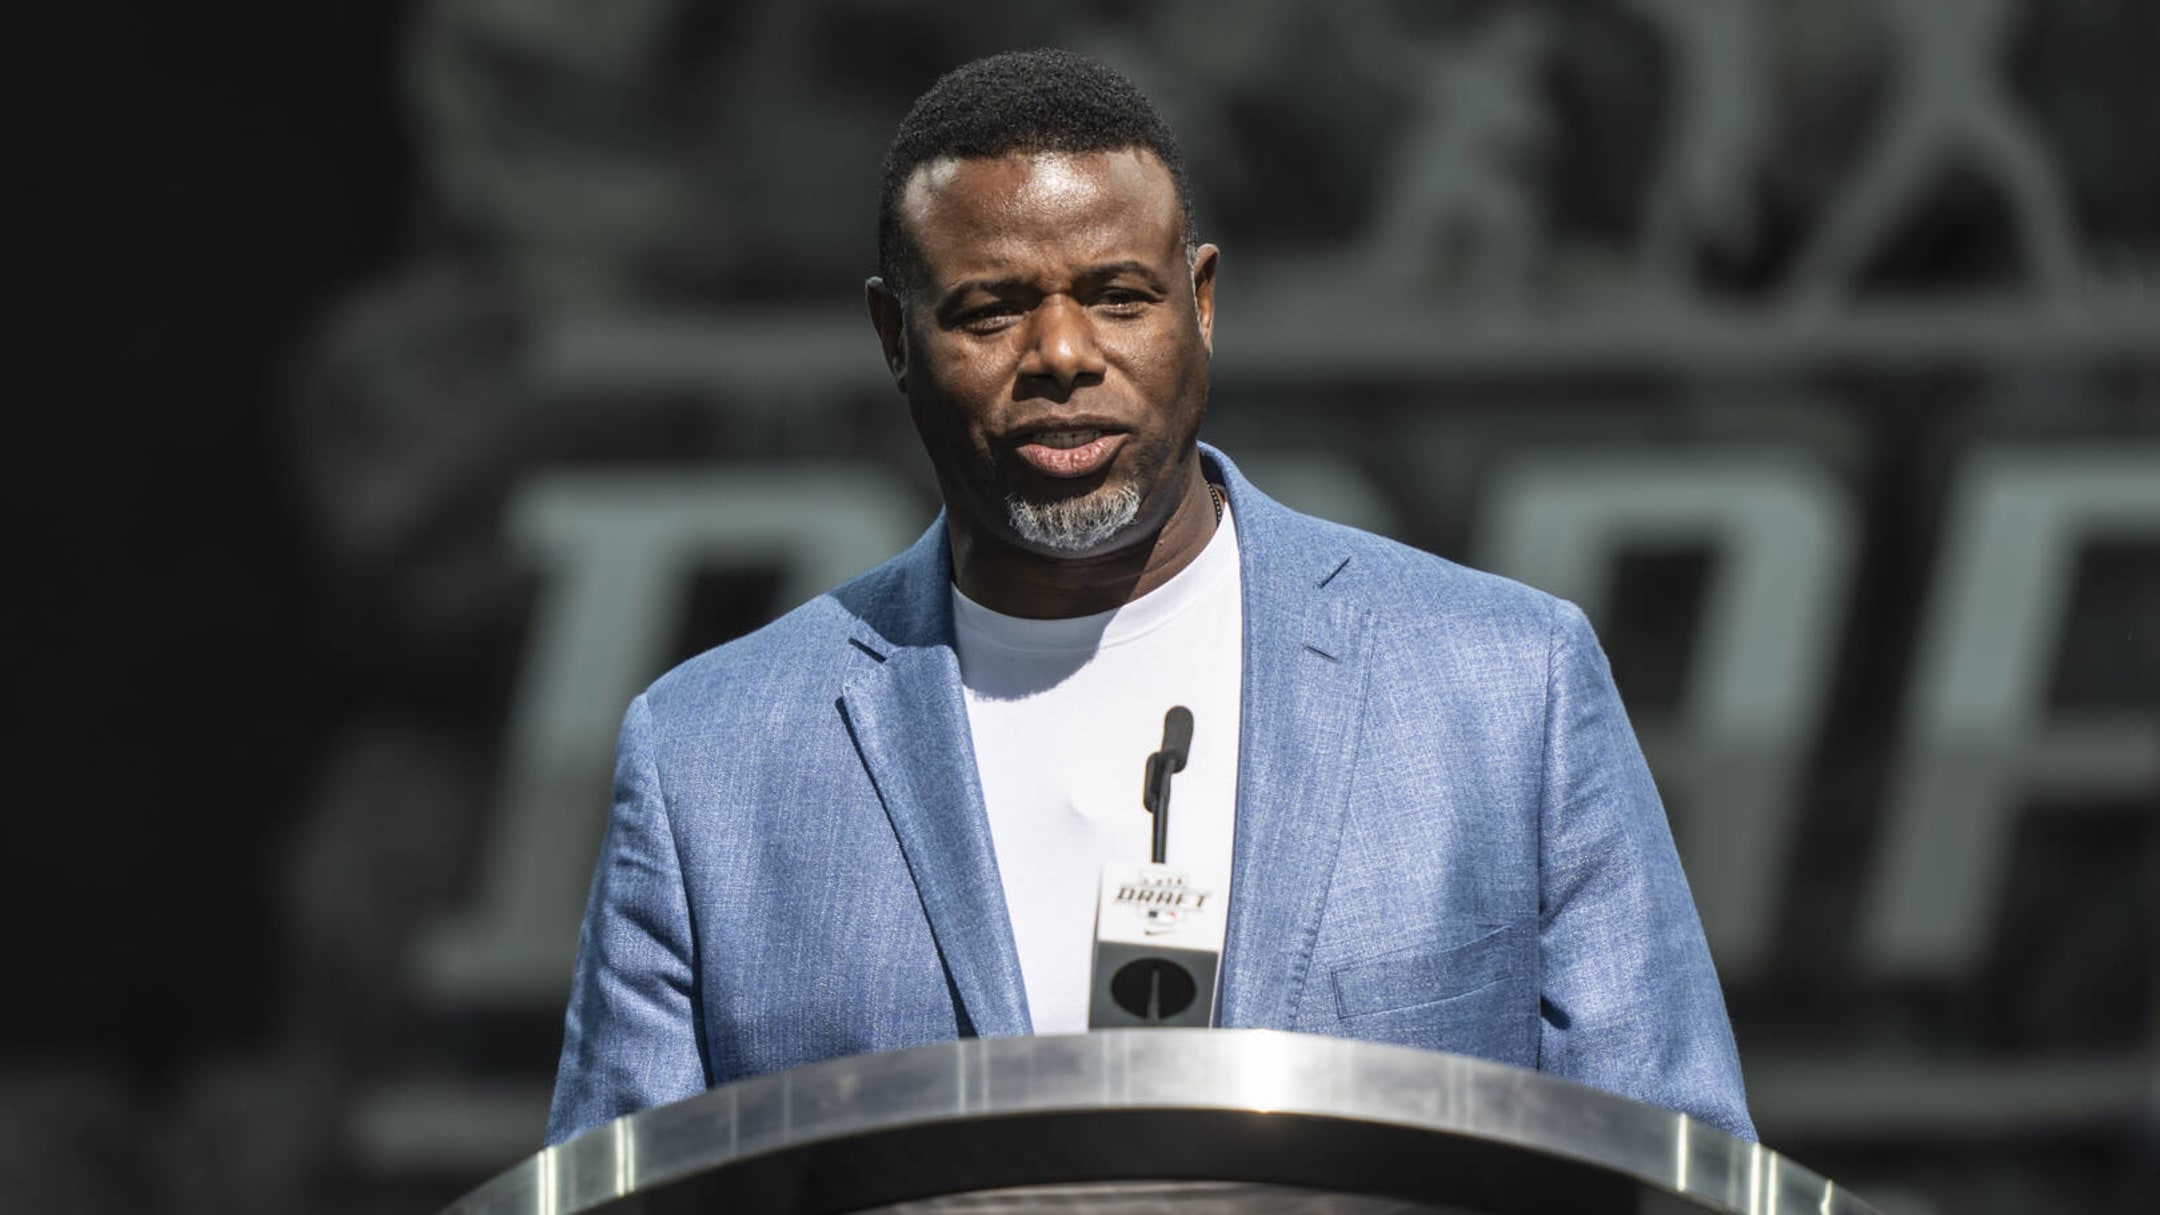 MLB Hall of Famer Ken Griffey Jr. Spotted Photographing Lionel